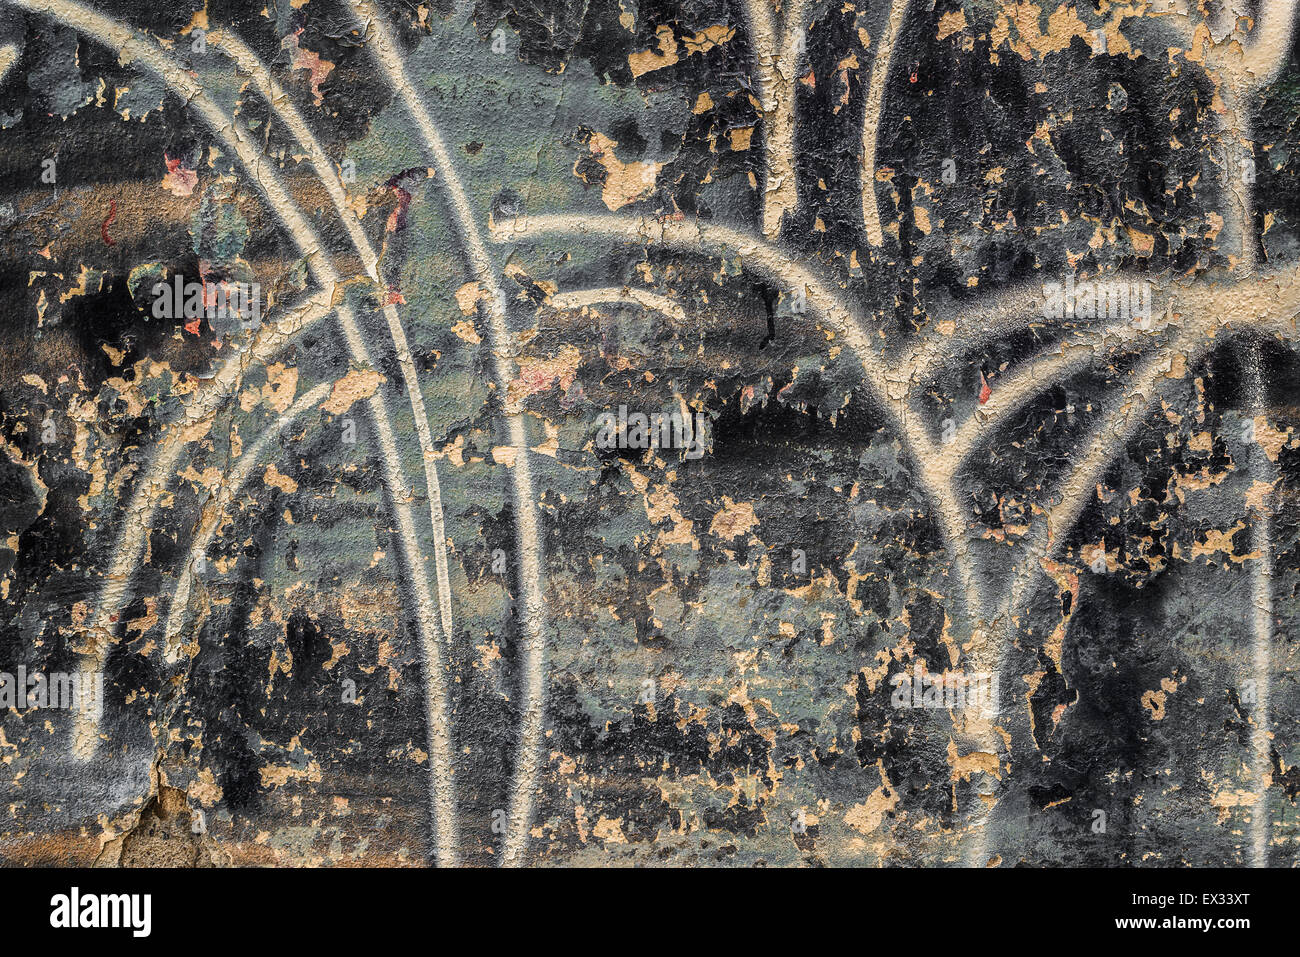 Grunge Wall with Black Paint Peel and Graffiti Spray as Urban Decay Backdrop Stock Photo